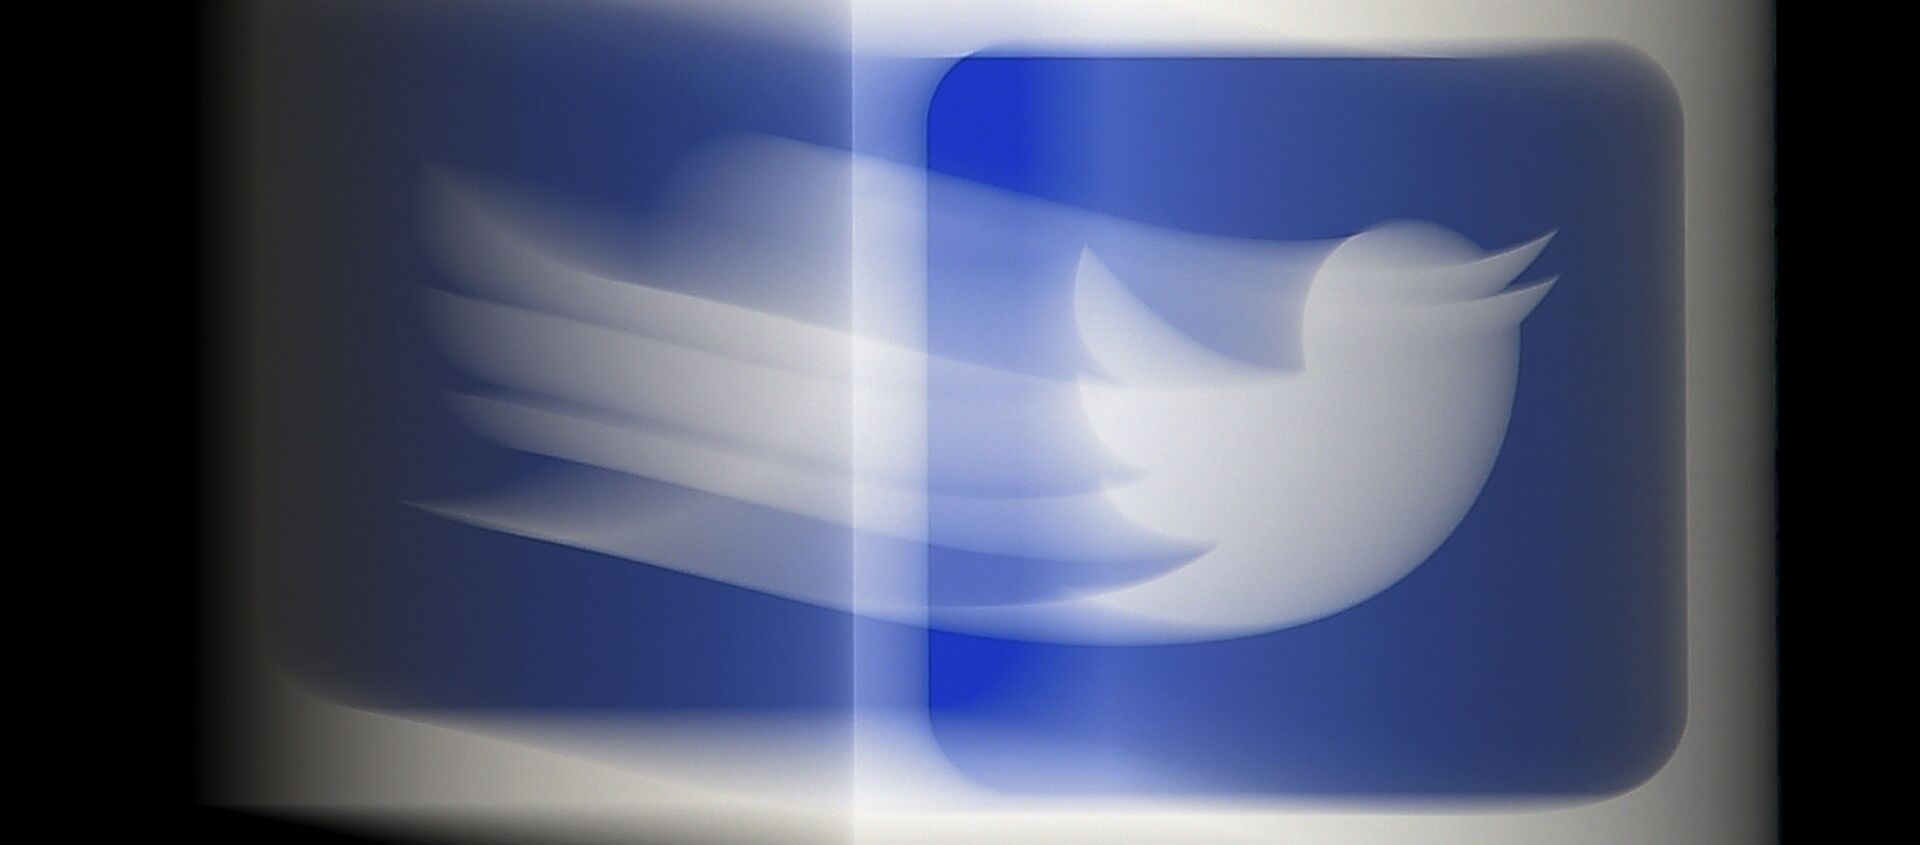 In this file photo taken on 10 August 2020, a Twitter logo is displayed on a mobile phone in Arlington, Virginia, US. - Sputnik International, 1920, 01.02.2021